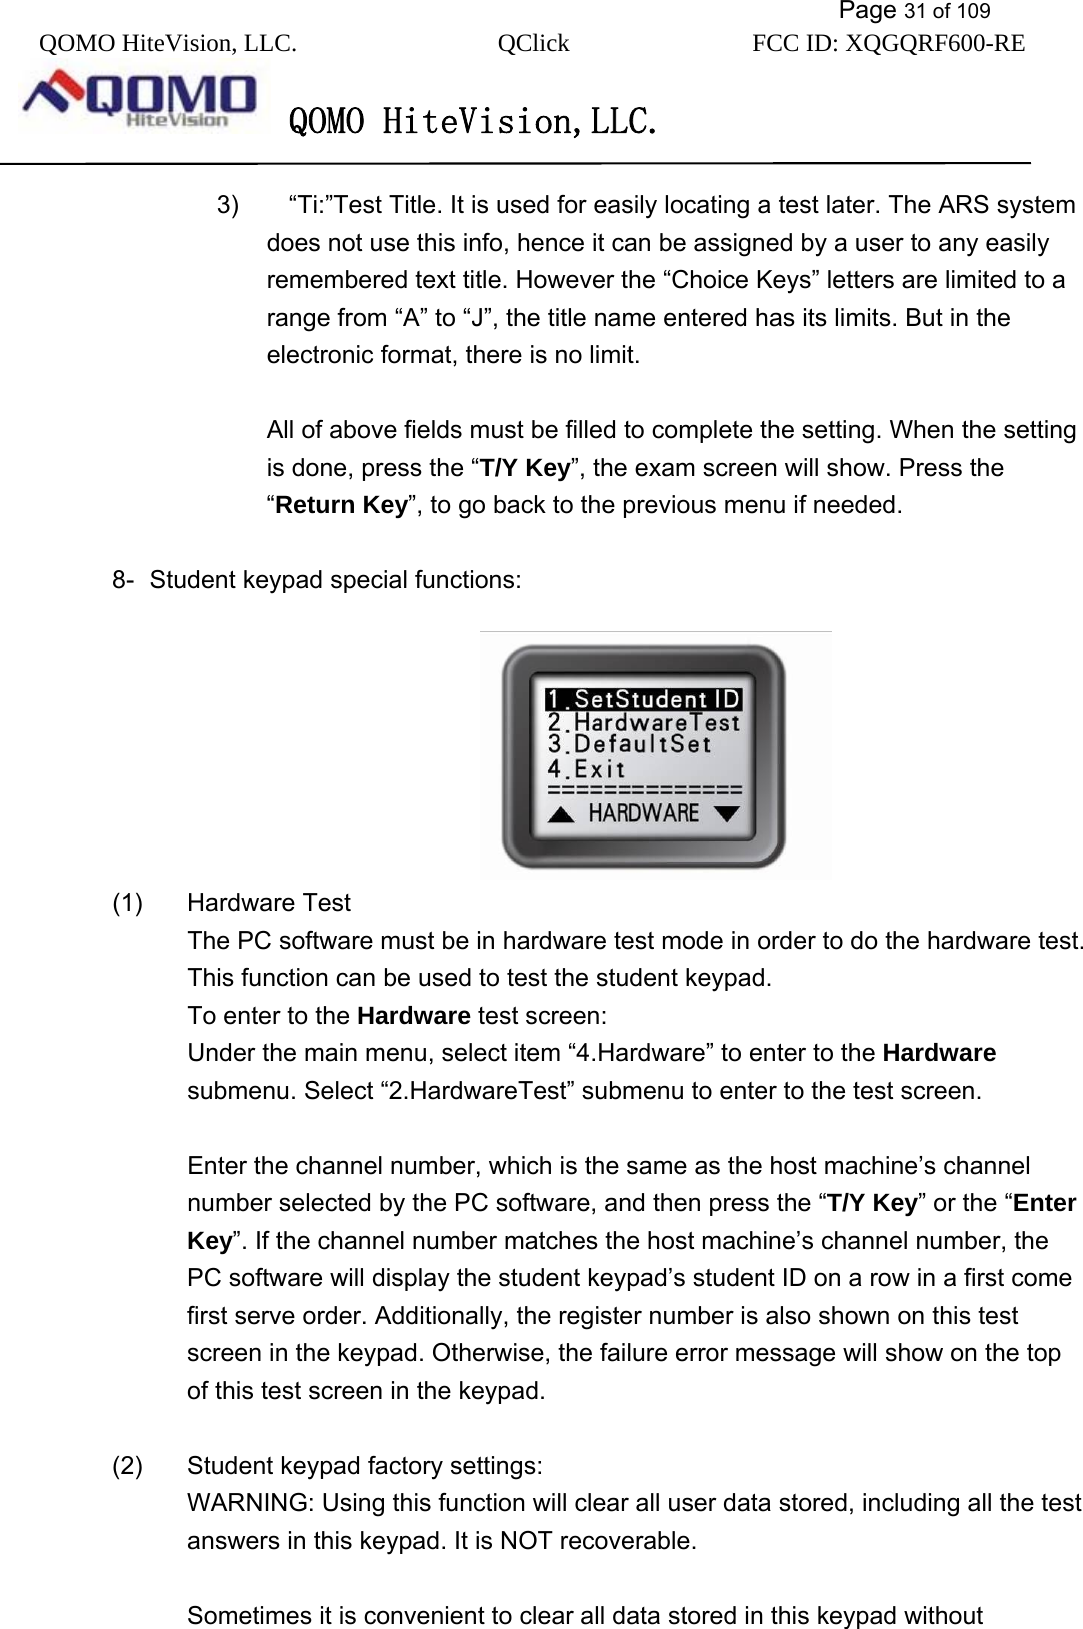           Page 31 of 109 QOMO HiteVision, LLC.  QClick        FCC ID: XQGQRF600-RE     QOMO HiteVision,LLC.   3)        “Ti:”Test Title. It is used for easily locating a test later. The ARS system does not use this info, hence it can be assigned by a user to any easily remembered text title. However the “Choice Keys” letters are limited to a range from “A” to “J”, the title name entered has its limits. But in the electronic format, there is no limit.    All of above fields must be filled to complete the setting. When the setting is done, press the “T/Y Key”, the exam screen will show. Press the “Return Key”, to go back to the previous menu if needed.  8-  Student keypad special functions:                                   (1) Hardware Test The PC software must be in hardware test mode in order to do the hardware test. This function can be used to test the student keypad. To enter to the Hardware test screen: Under the main menu, select item “4.Hardware” to enter to the Hardware submenu. Select “2.HardwareTest” submenu to enter to the test screen.  Enter the channel number, which is the same as the host machine’s channel number selected by the PC software, and then press the “T/Y Key” or the “Enter Key”. If the channel number matches the host machine’s channel number, the PC software will display the student keypad’s student ID on a row in a first come first serve order. Additionally, the register number is also shown on this test screen in the keypad. Otherwise, the failure error message will show on the top of this test screen in the keypad.  (2)  Student keypad factory settings: WARNING: Using this function will clear all user data stored, including all the test answers in this keypad. It is NOT recoverable.    Sometimes it is convenient to clear all data stored in this keypad without 